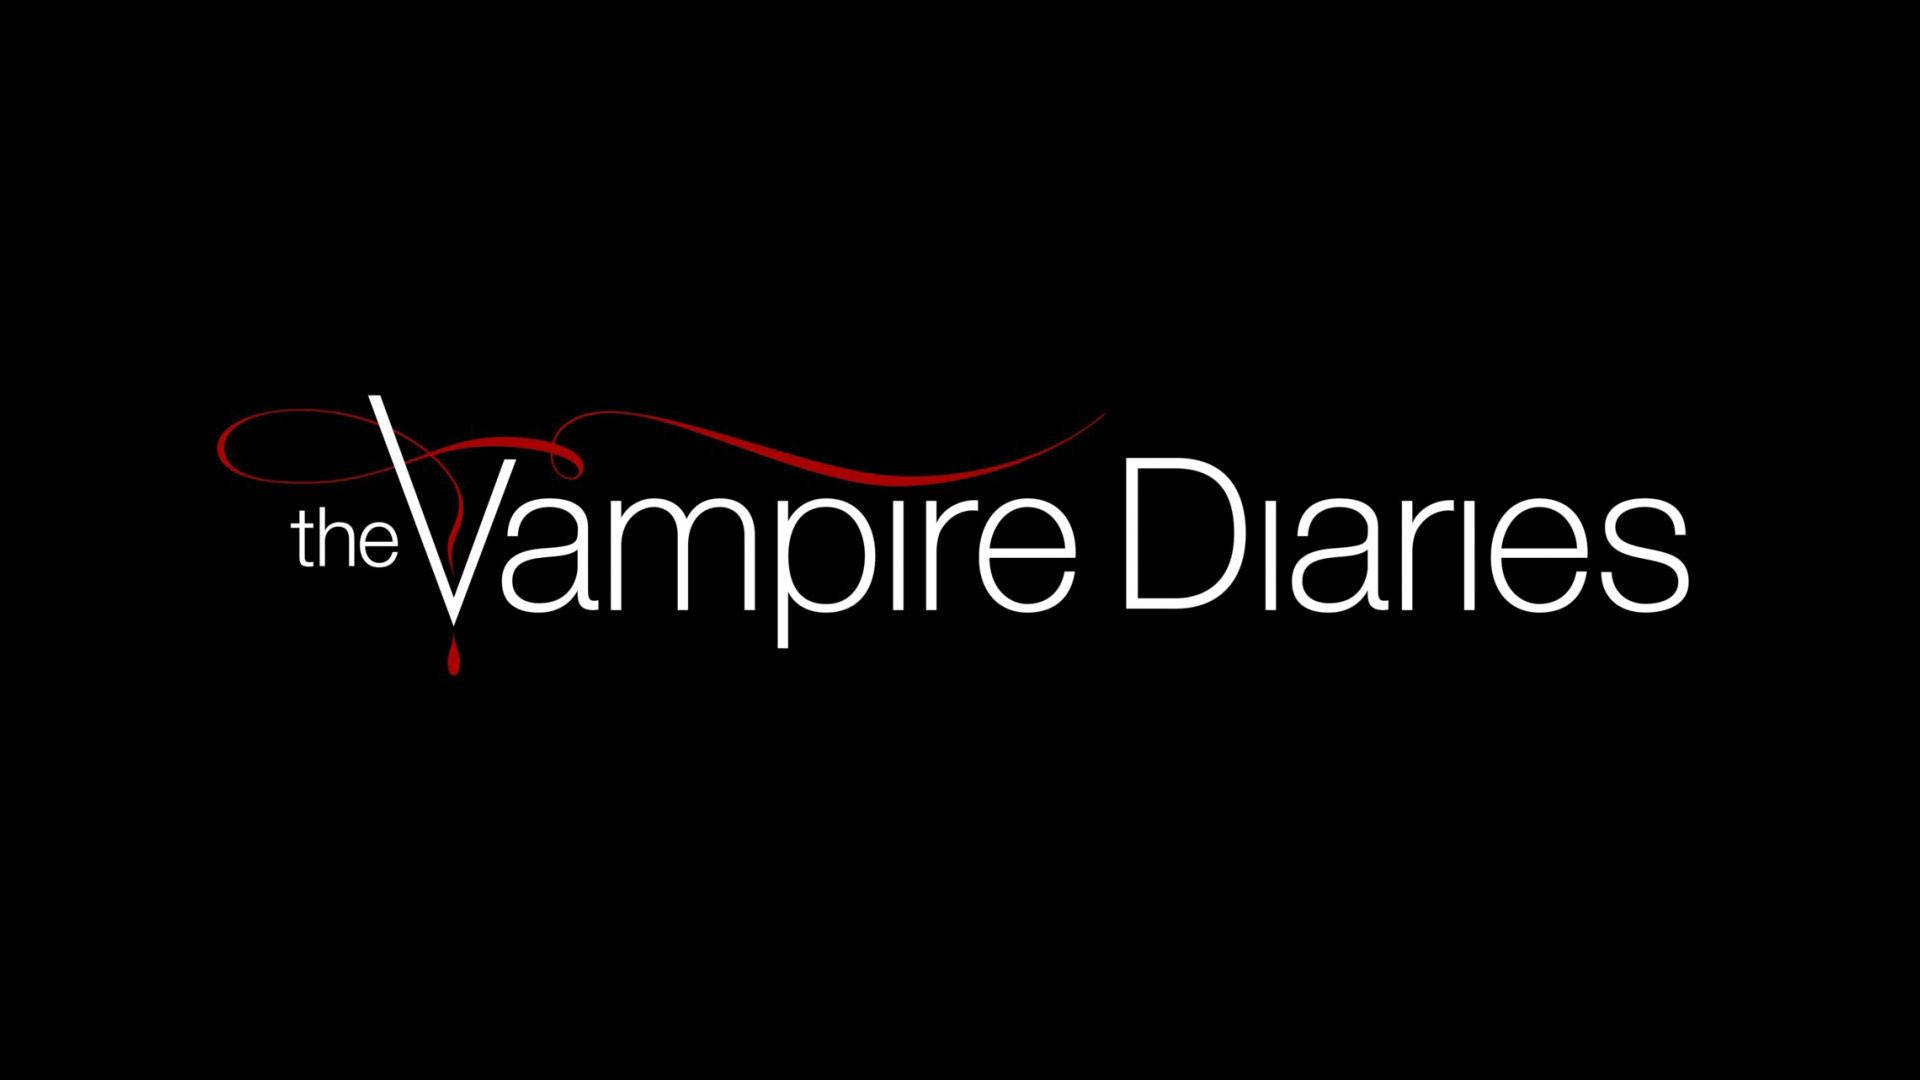 The iconic logo of 'The Vampire Diaries', a popular television series. Wallpaper